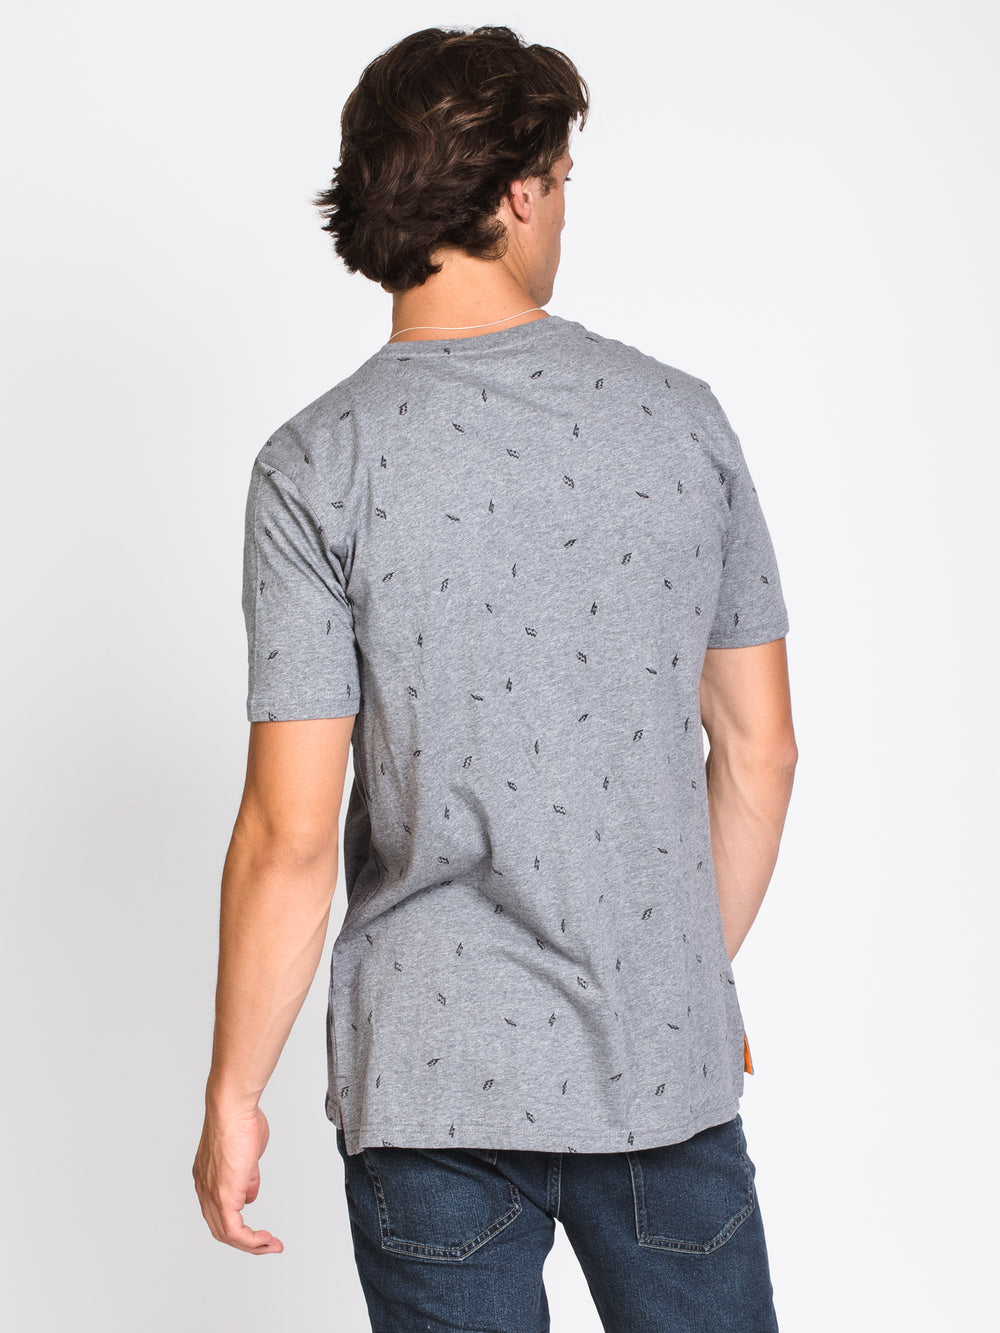 MENS DITSY PRINT T - CLEARANCE